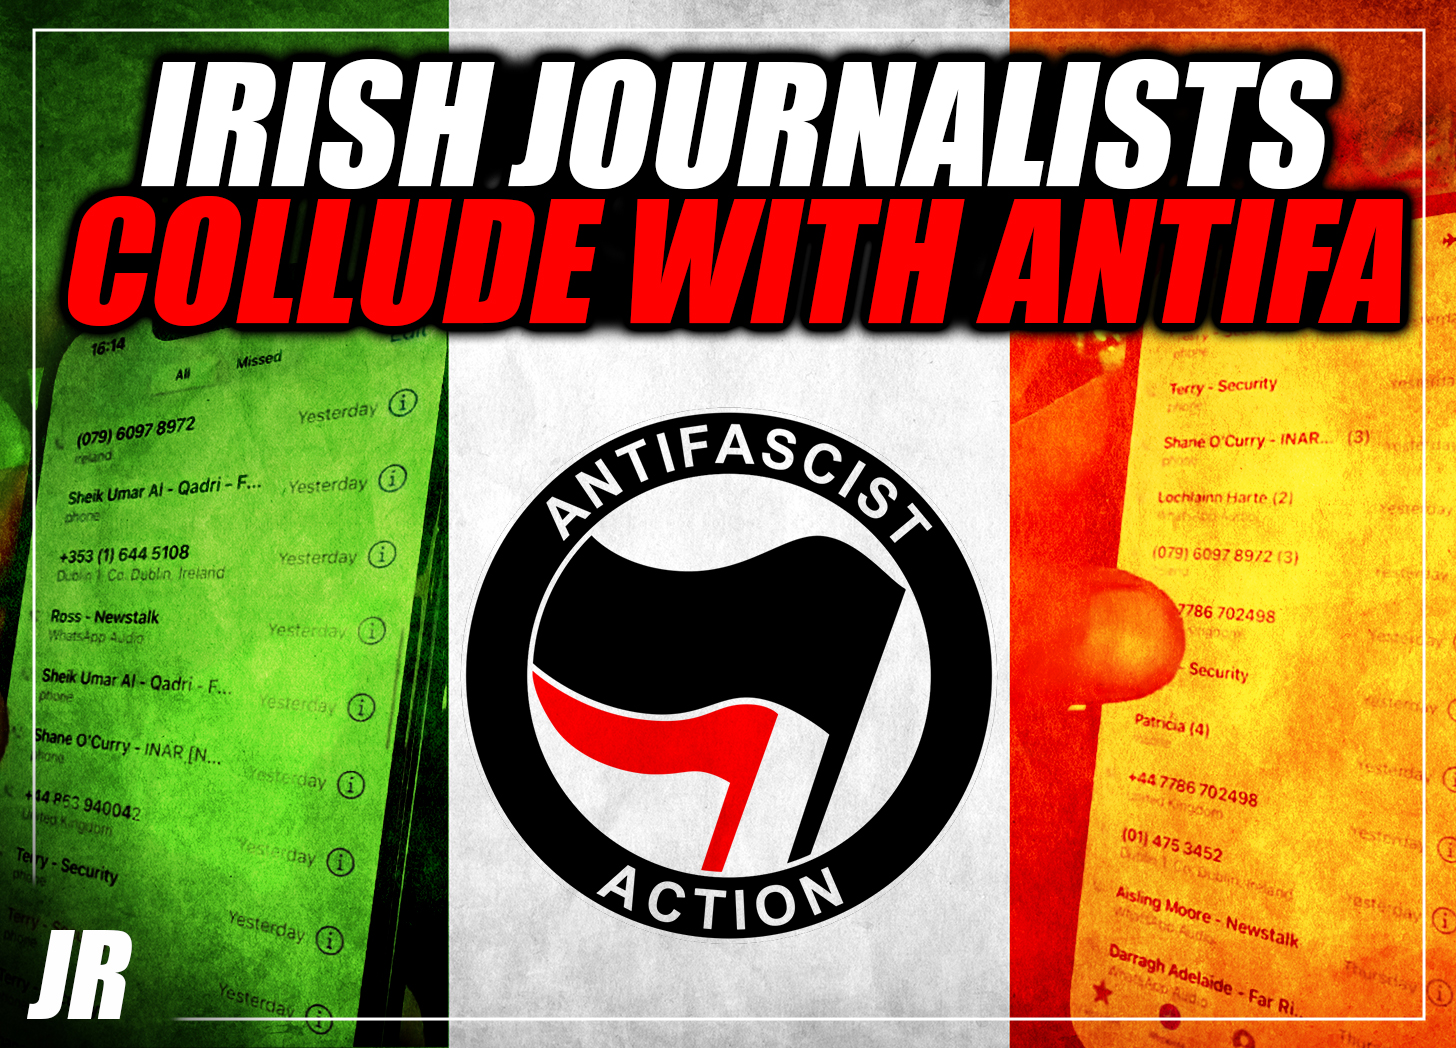 Phone dropped by ‘battered’ Irish ‘Antifa’ reveals journalist collusion